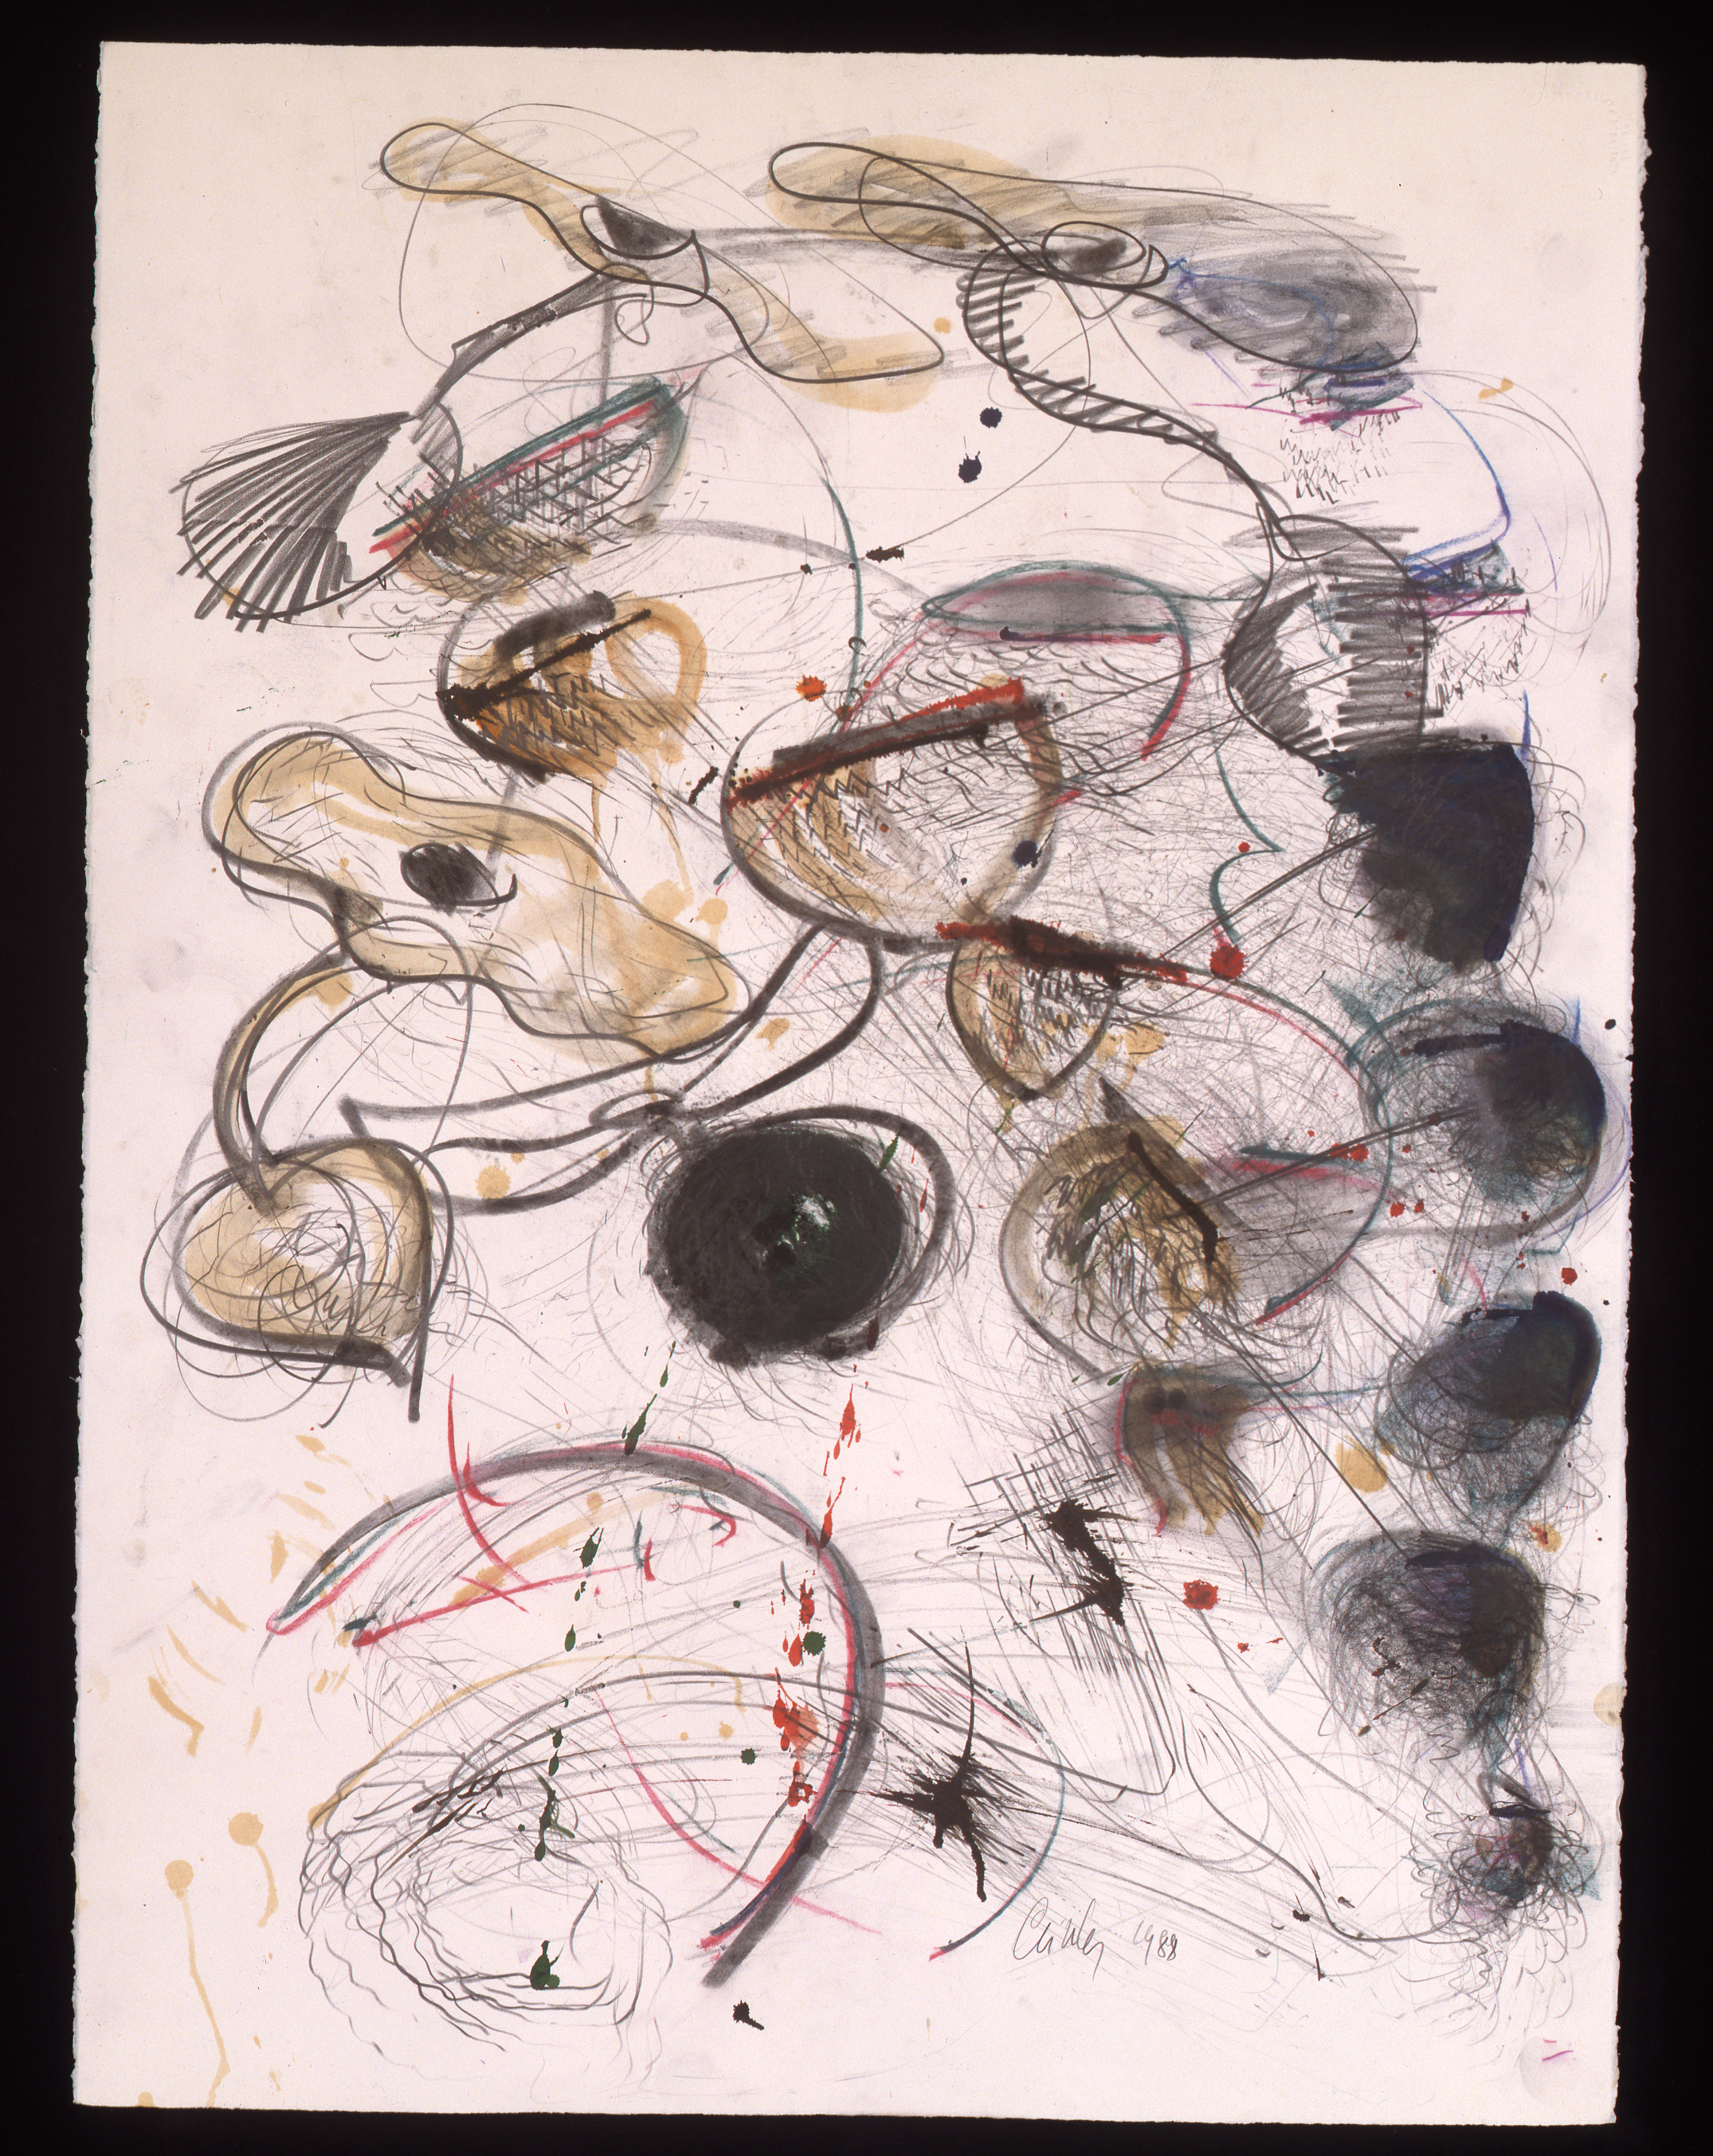  Dale Chihuly,  Persian Drawing  ,&nbsp; (1988, mixed media on paper, 30 x 22 inches), DC.363 